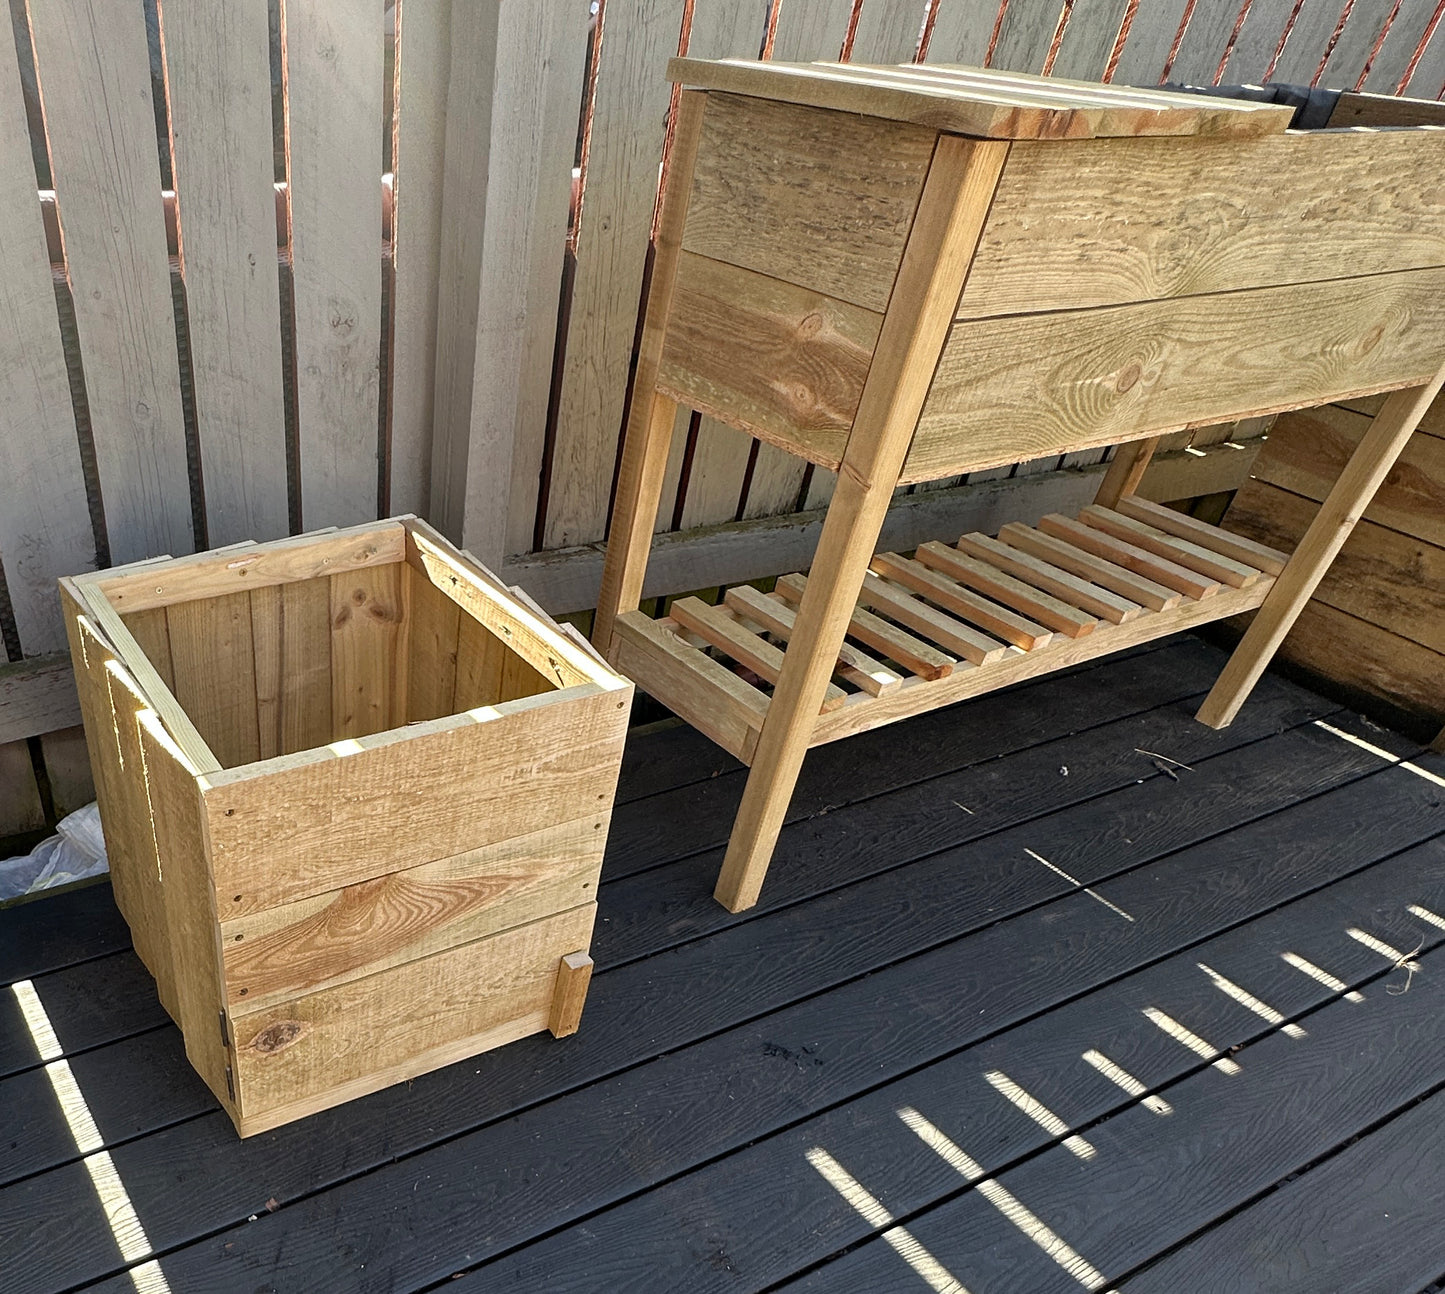 Potato Planters, grow lots of potato's in a small space with this lovely wooden planter, wooden potato planter,